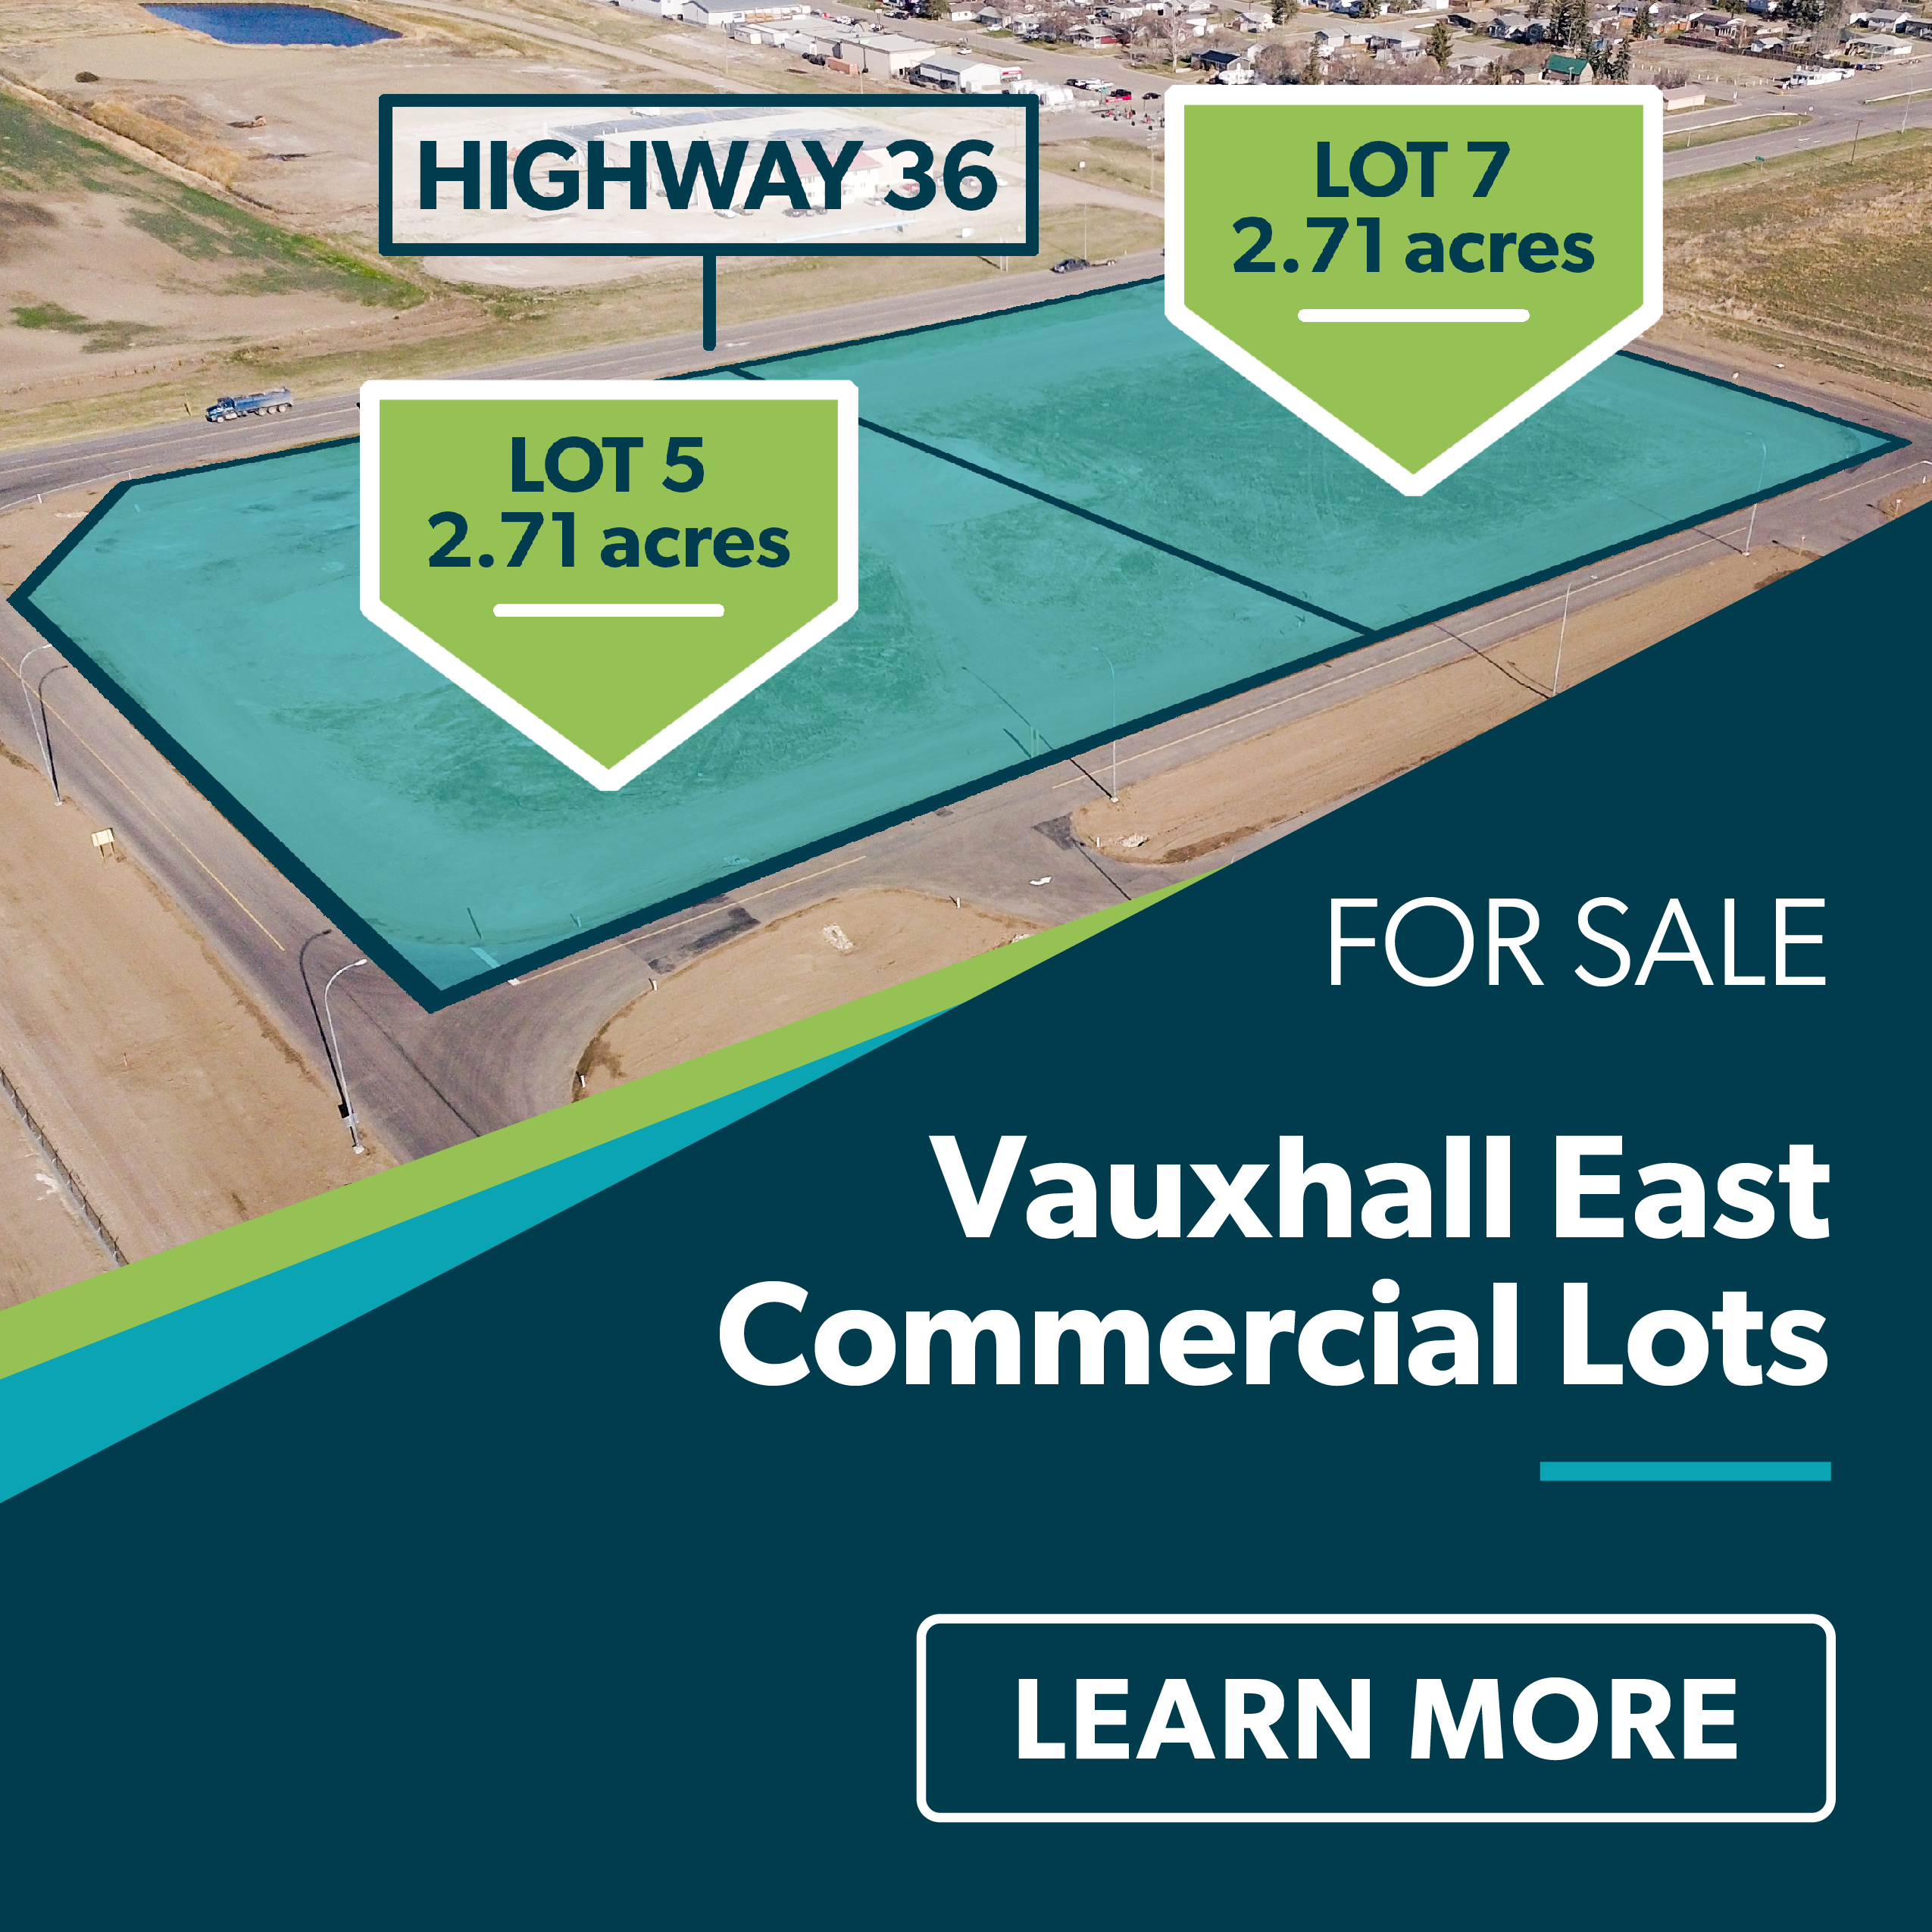 Vauxhall East Commercial Lots For Sale